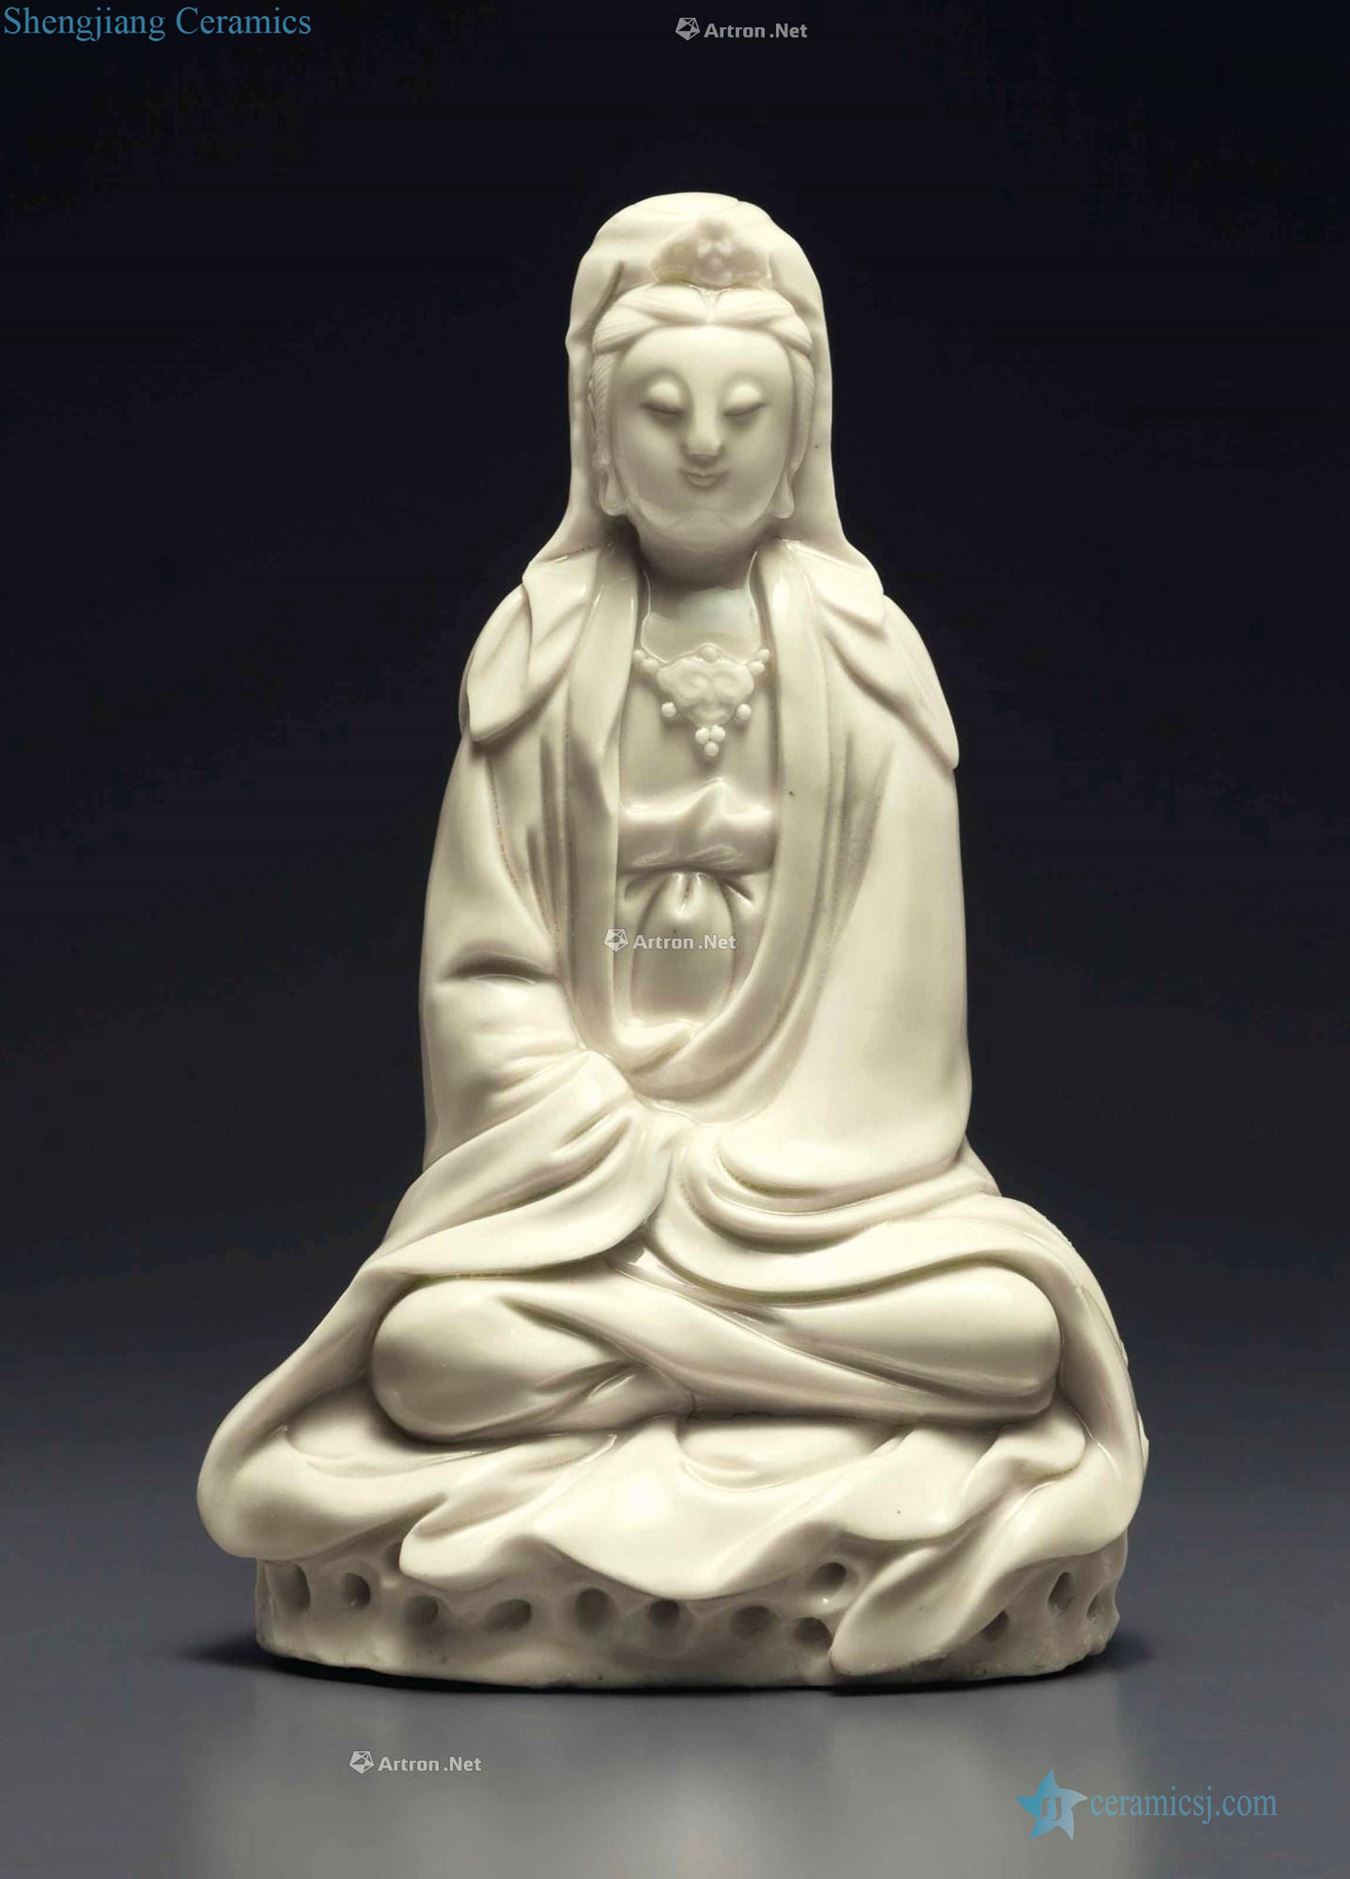 Late Ming dynasty, the early 17th century A DEHUA FIGURE OF GUANYIN